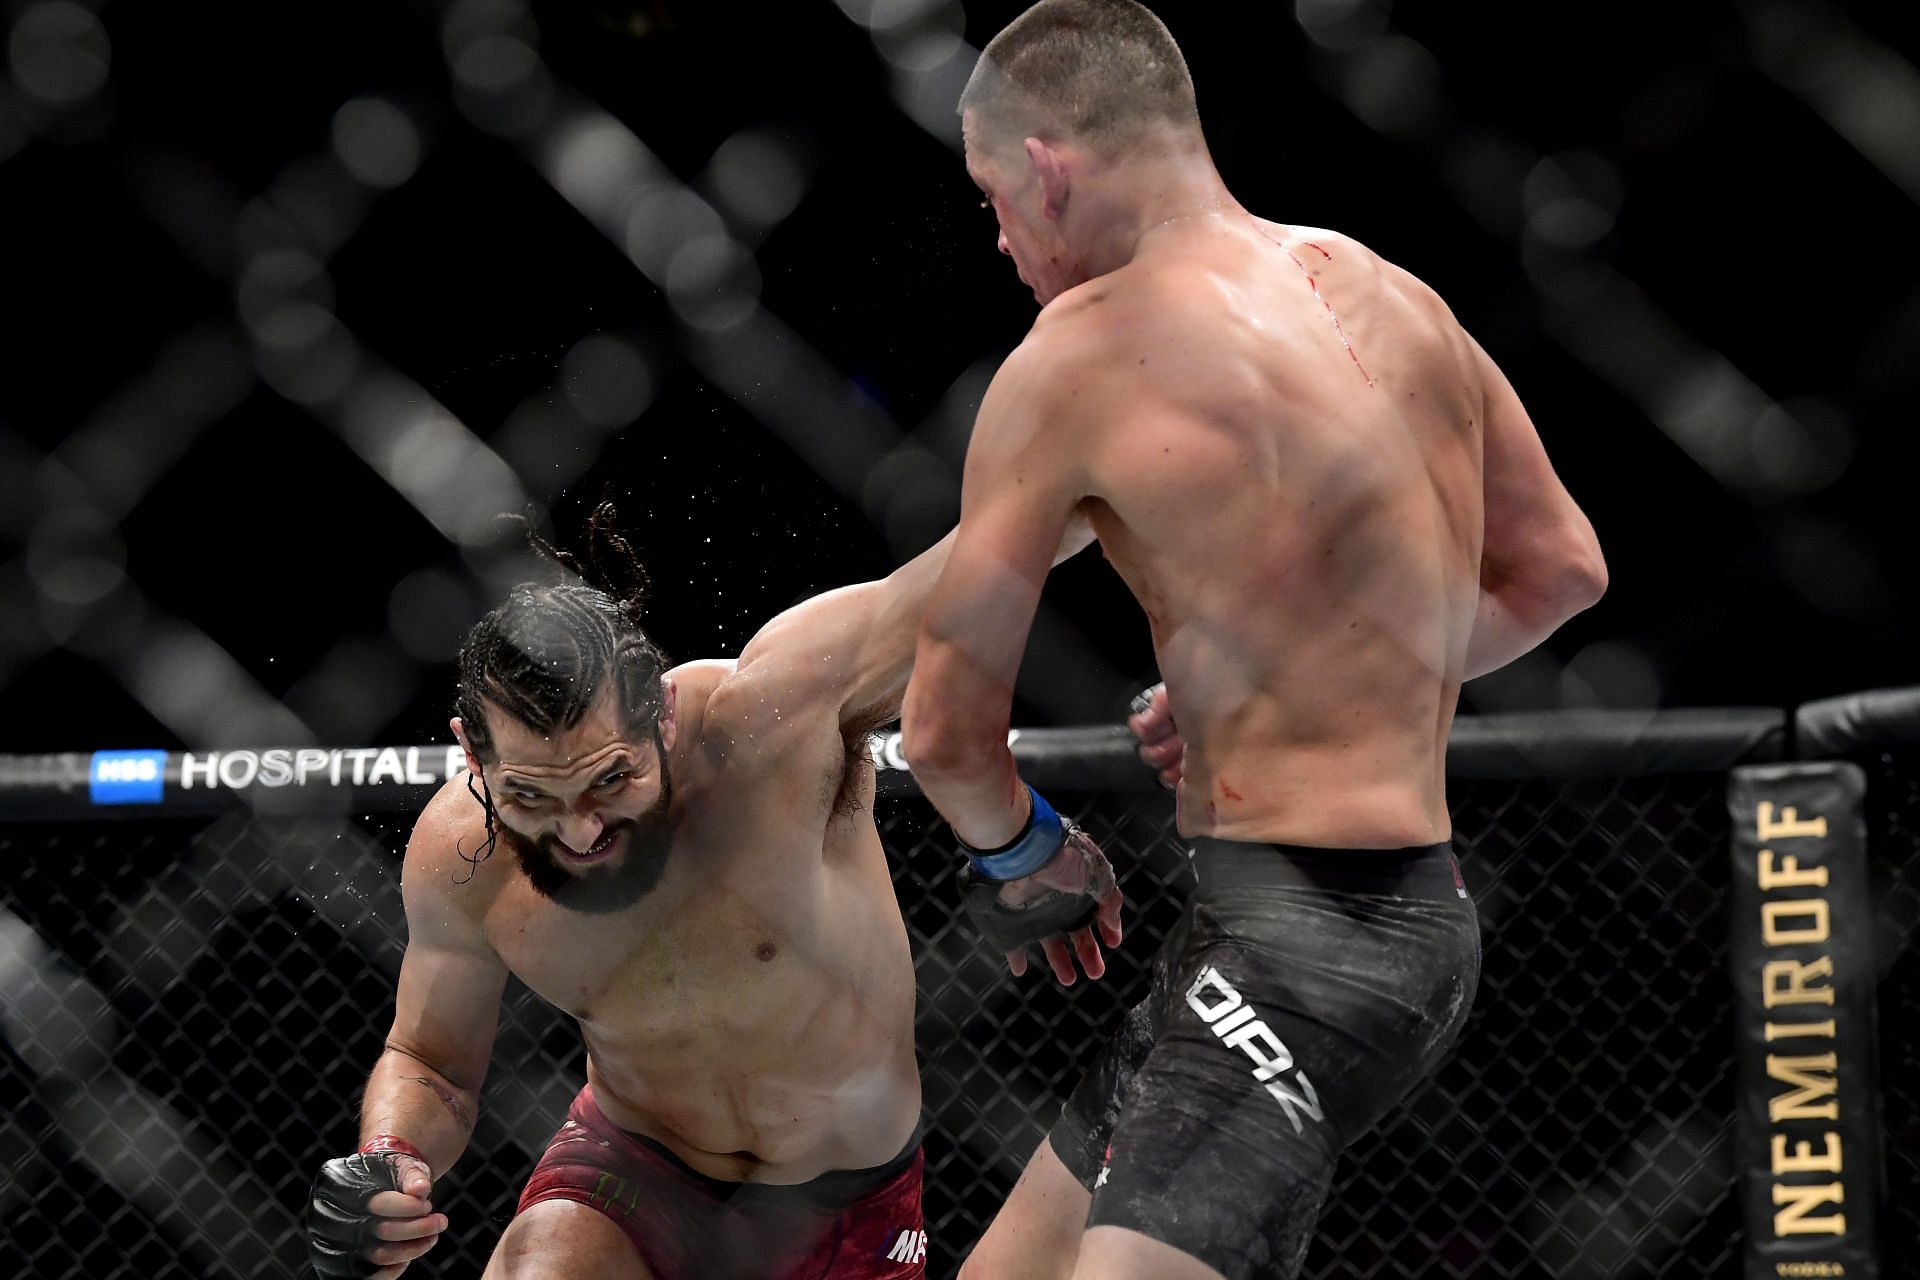 Jorge Masvidal has not won a fight since beating Nate Diaz in 2019